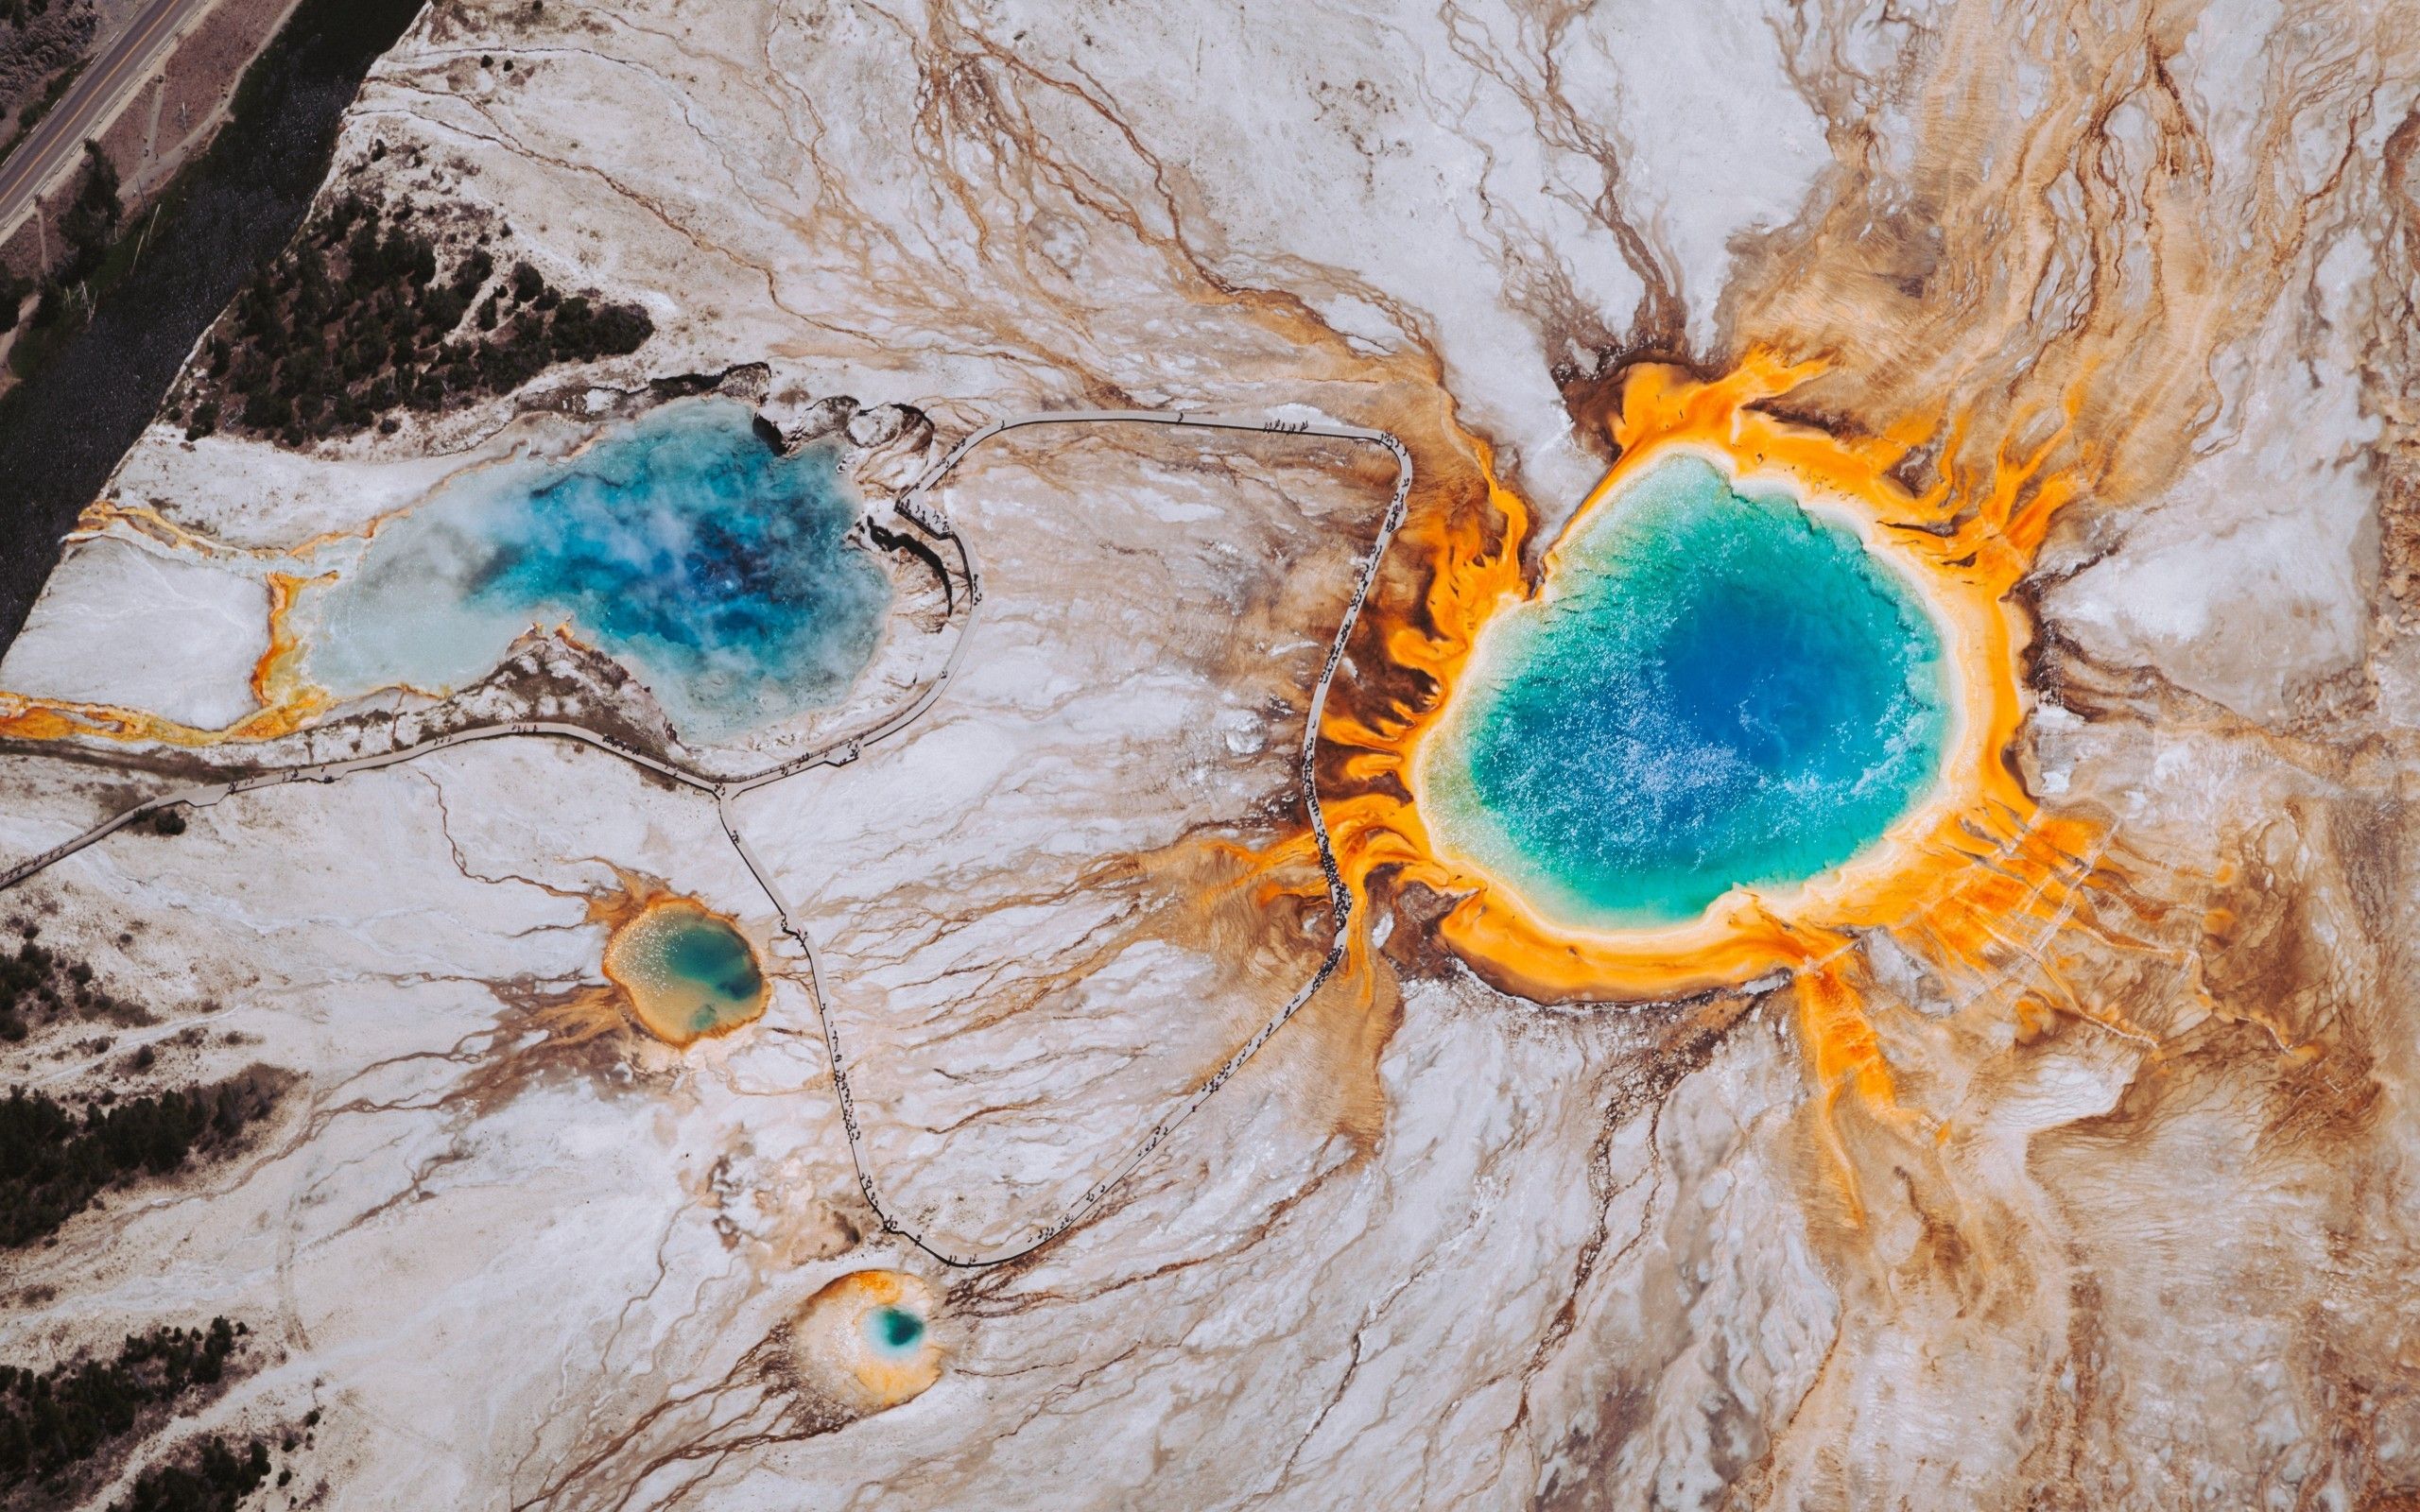 Download 2560x1600 United States Wyoming, Grand Prismatic Spring